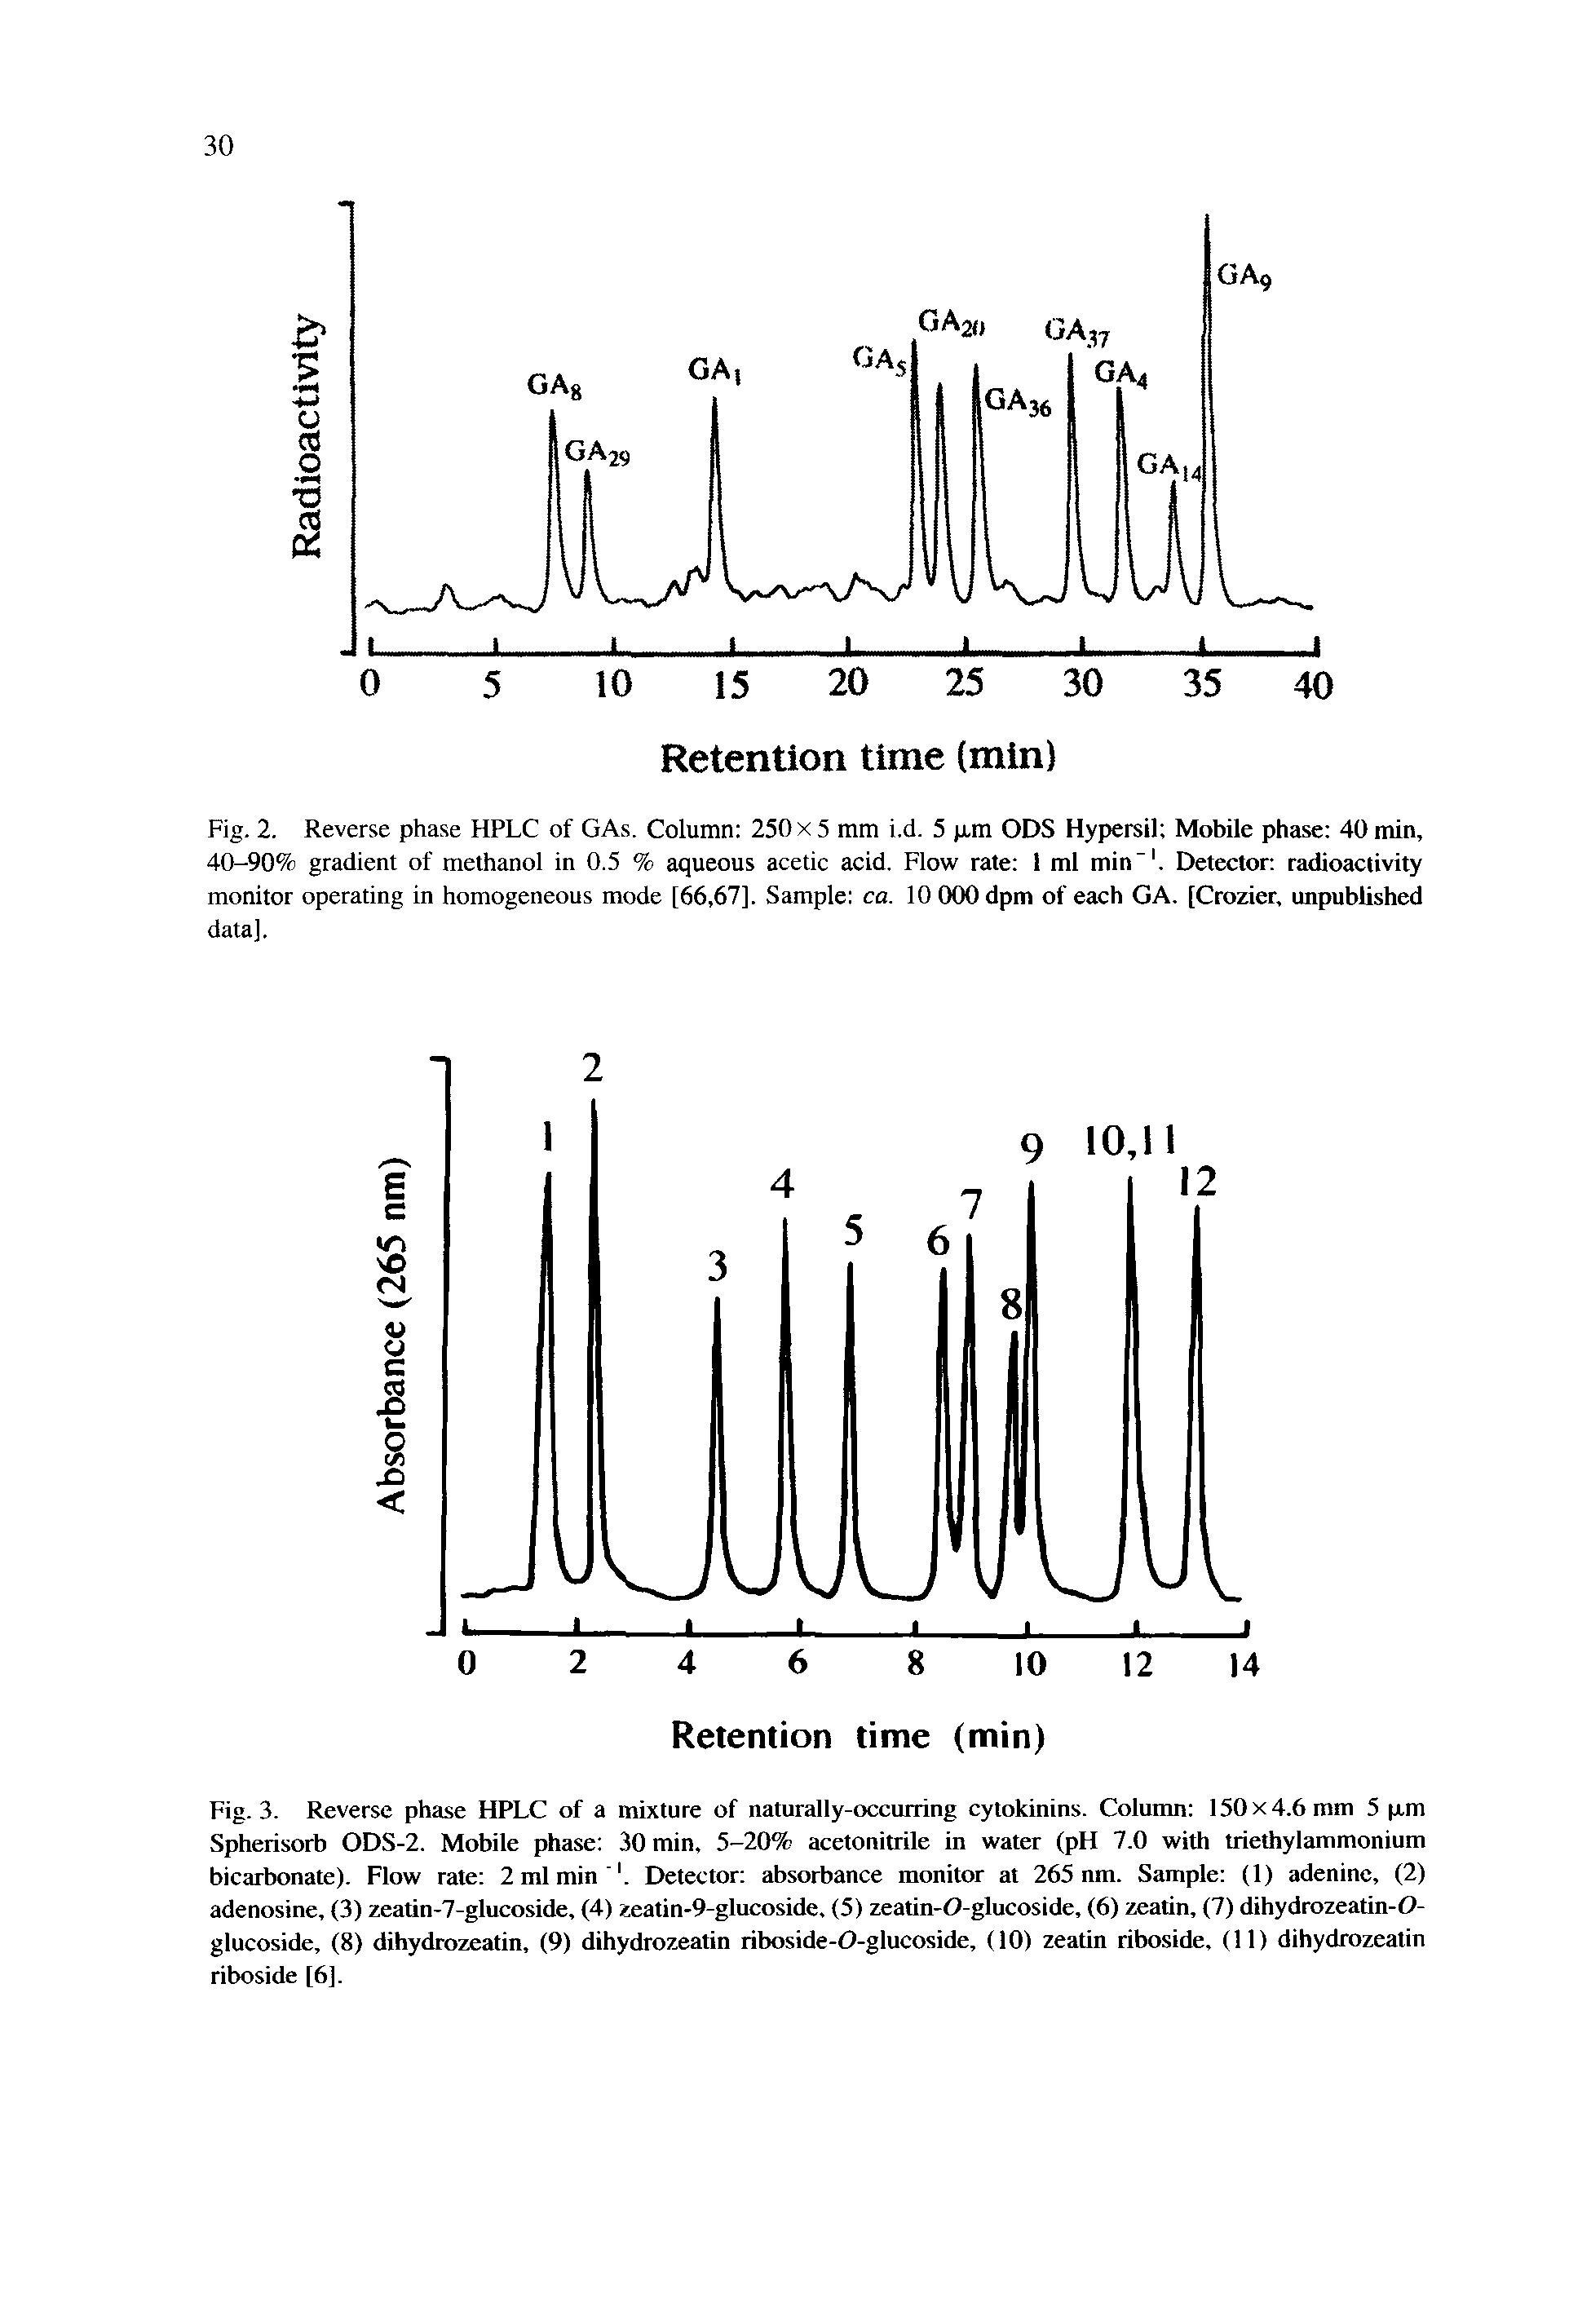 Fig. 3. Reverse phase HPLC of a mixture of naturally-occurring cytokinins. Column 150x4.6 mm 5 p.m Spherisorb ODS-2. Mobile phase 30 min, 5-20% acetonitrile in water (pH 7.0 with triethylammonium bicarbonate). Flow rate 2 ml min. Detector absorbance monitor at 265 nm. Sample (1) adenine, (2) adenosine, (3) zeatin-7-glucoside, (4) zeatin-9-glucoside. (5) zeatin-O-glucoside, (6) zeatin, (7) dihydrozeatin-O-glucoside, (8) dihydrozeatin, (9) dihydrozeatin riboside-O-glucoside, (10) zeatin riboside, (11) dihydrozeatin riboside [6].